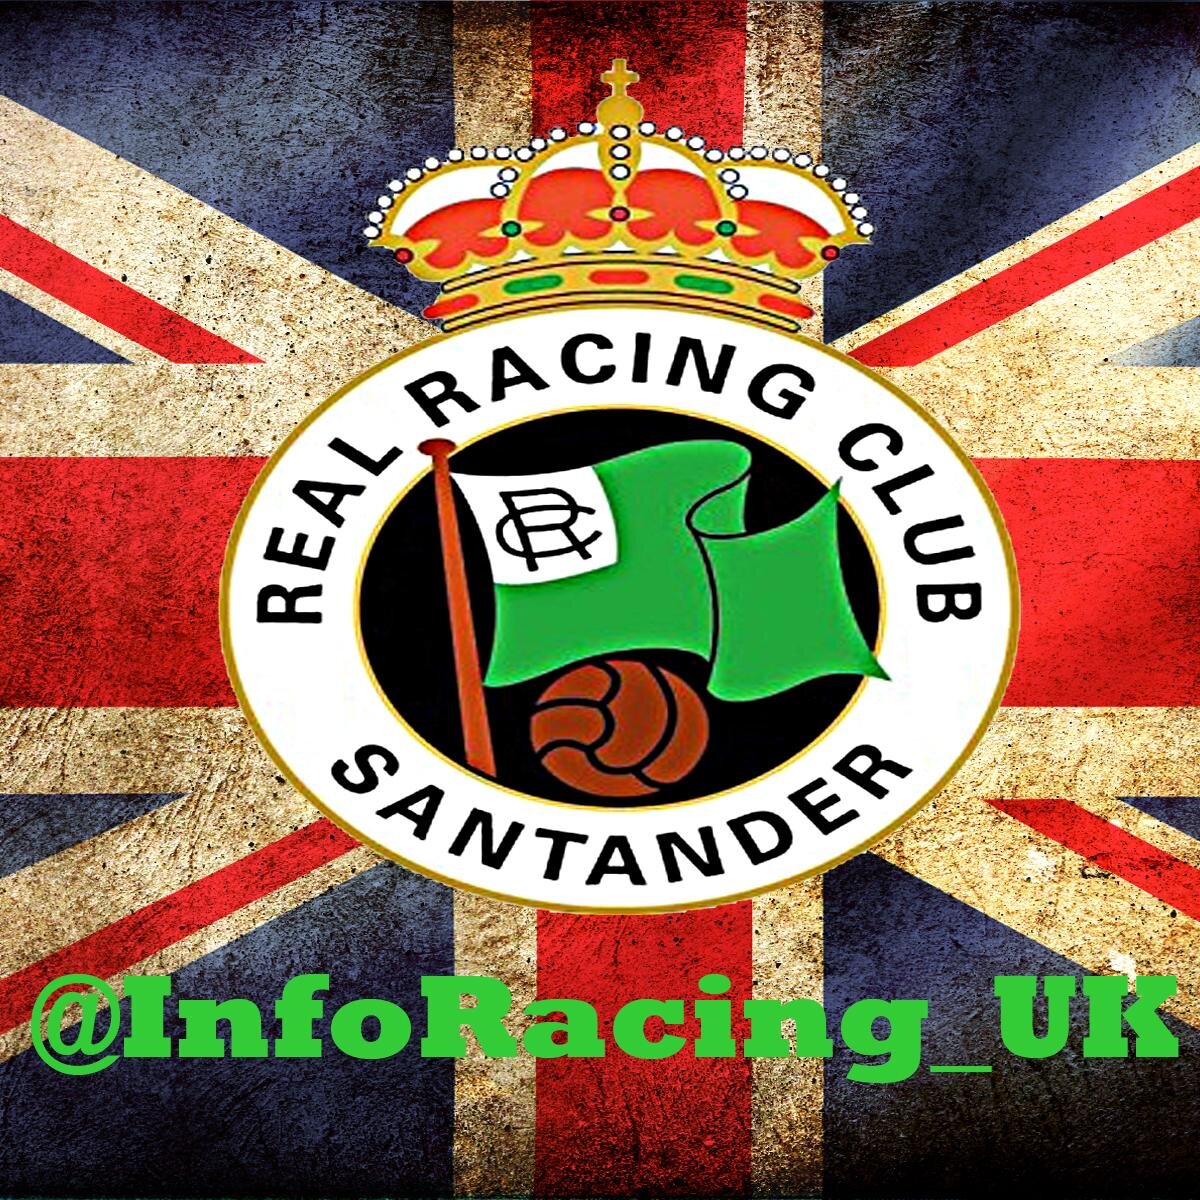 English account for Racing Santander. We've to be Known all over the world. Come on you Racing.